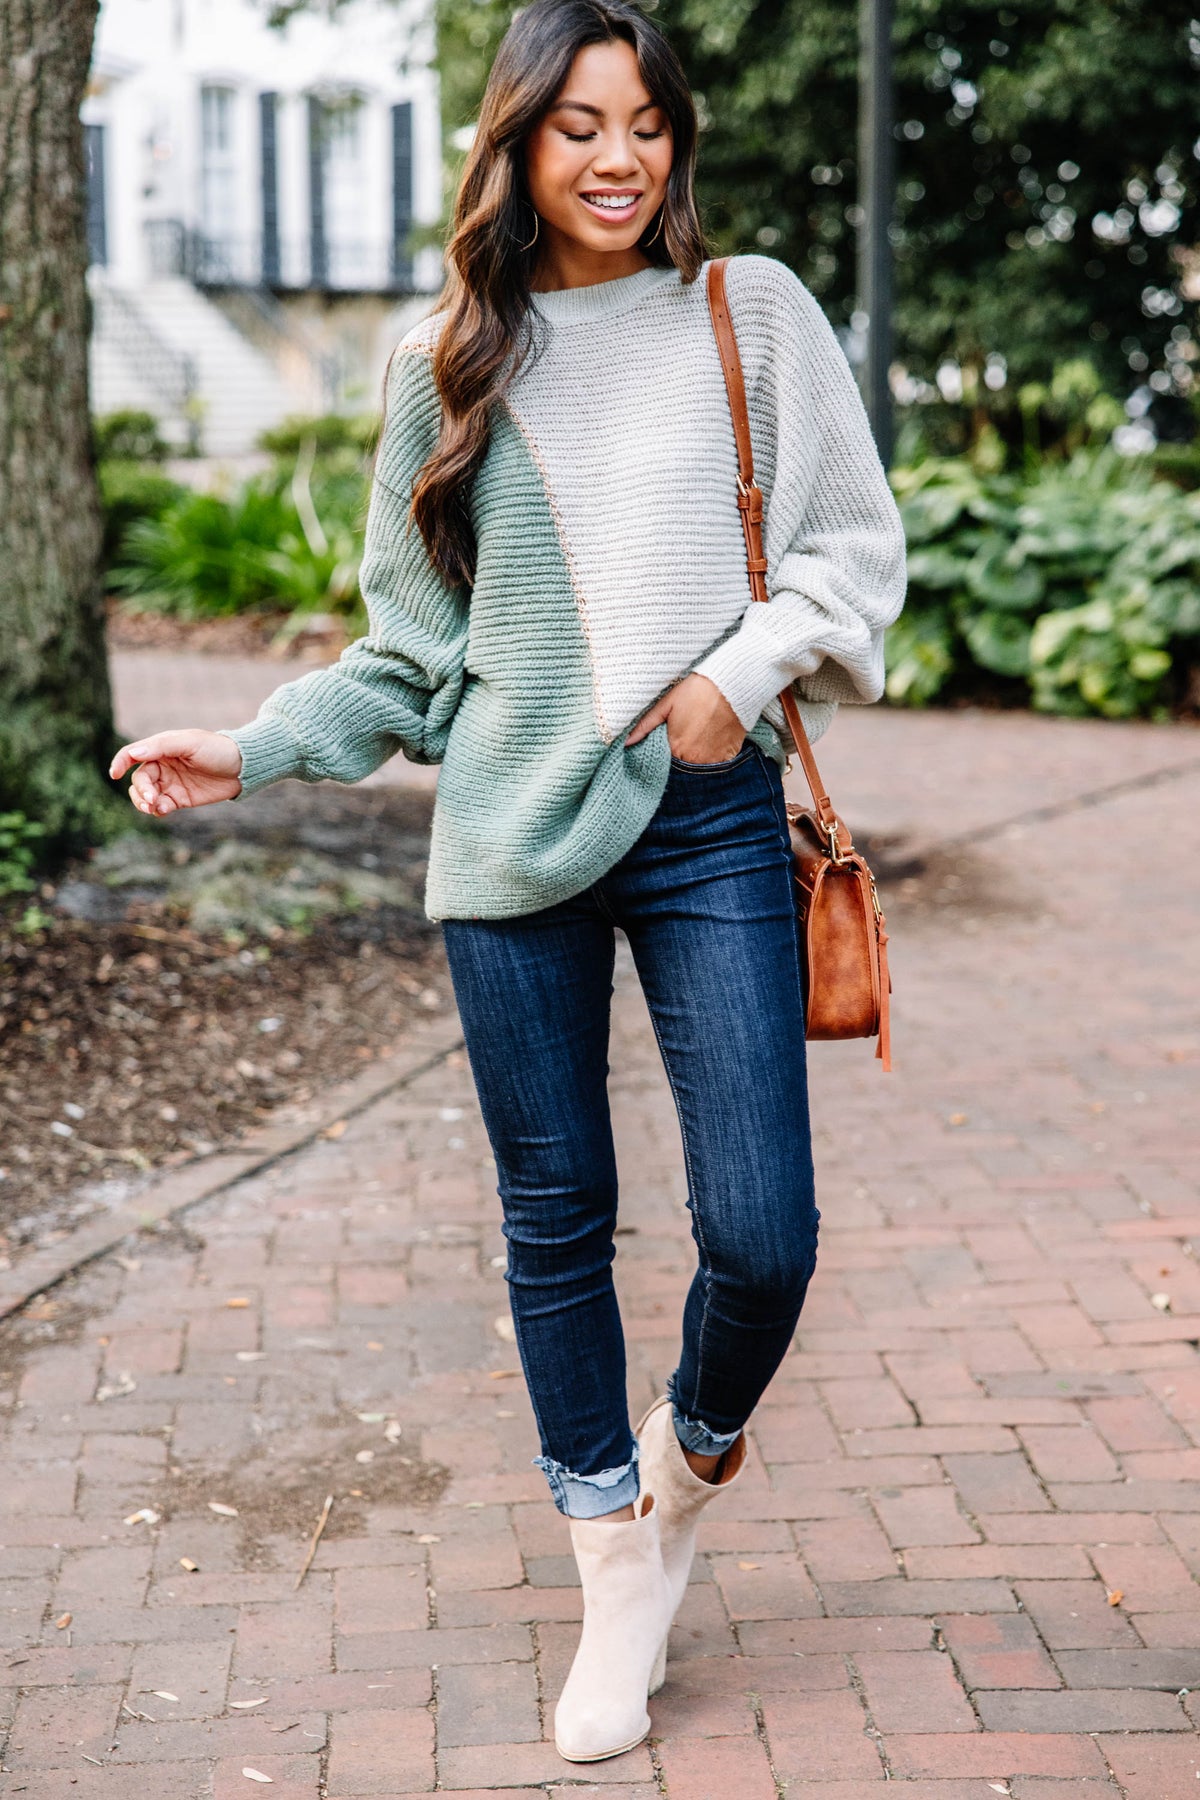 Perfect Vision Sage Green Colorblock Sweater – Shop the Mint